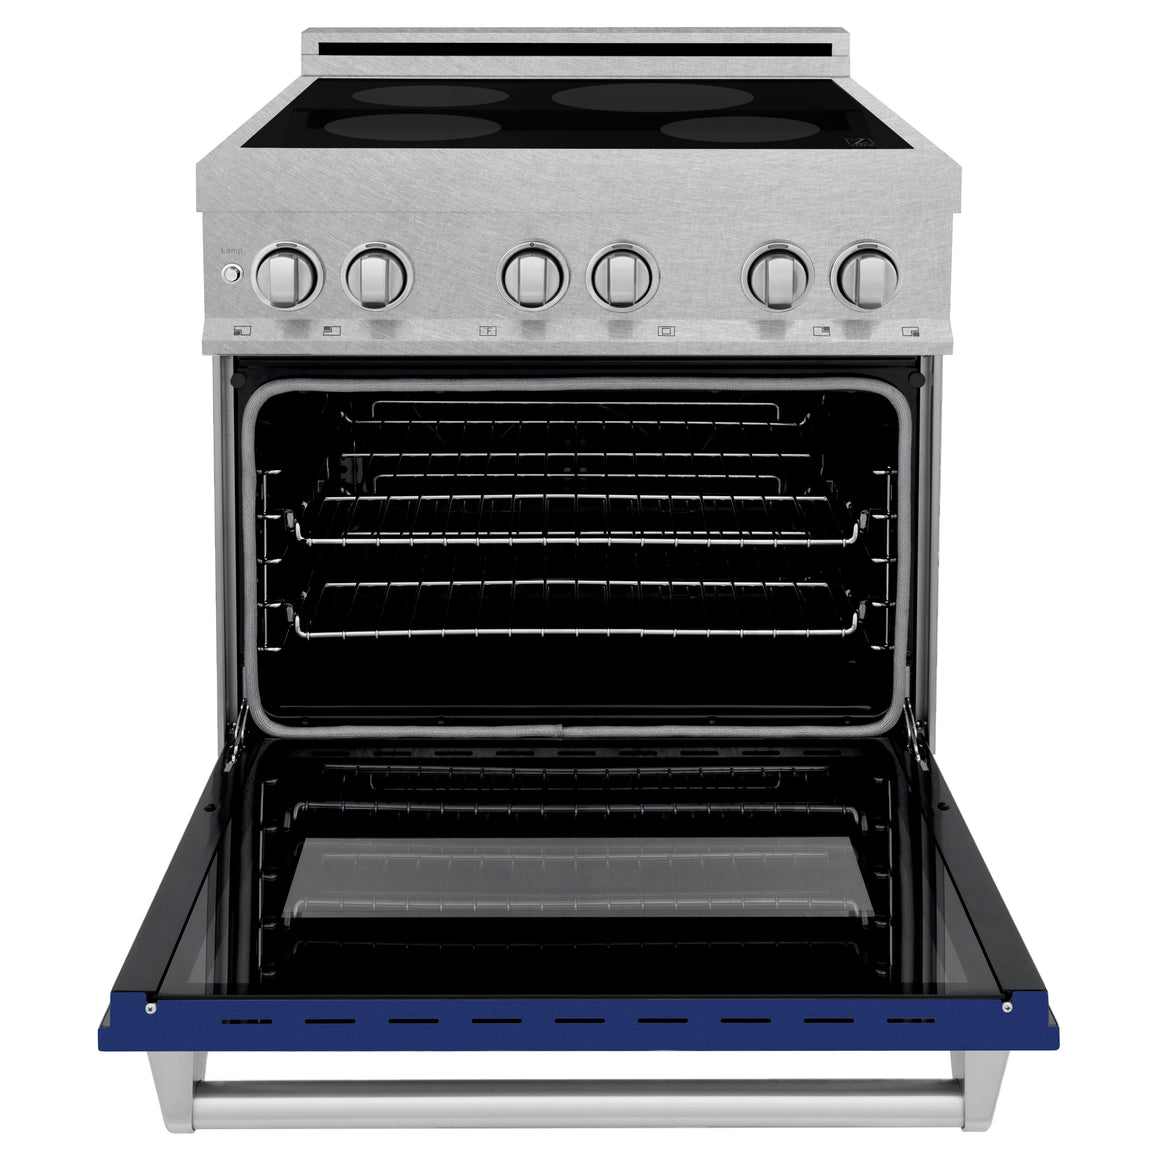 ZLINE 30" Professional Induction Cooktop/Electric Oven Range in DURASNOW® Stainless Steel and Blue Gloss Door (RAINDS-BG-30)